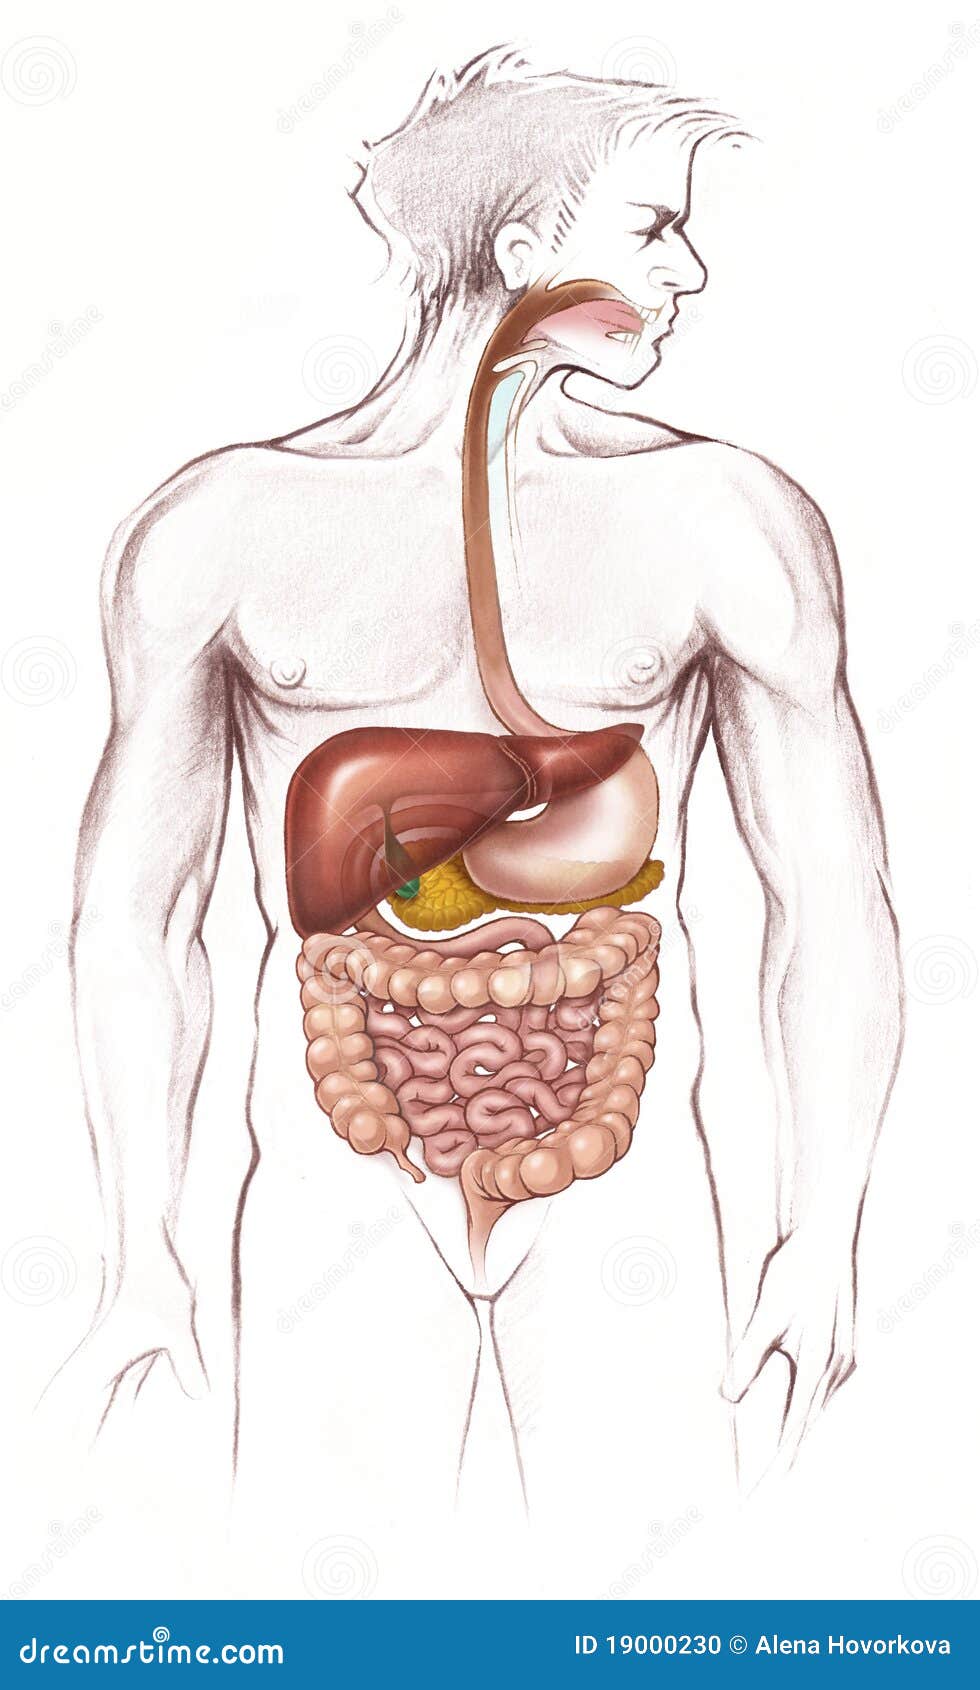 Digestive System Human Body Video Free Download